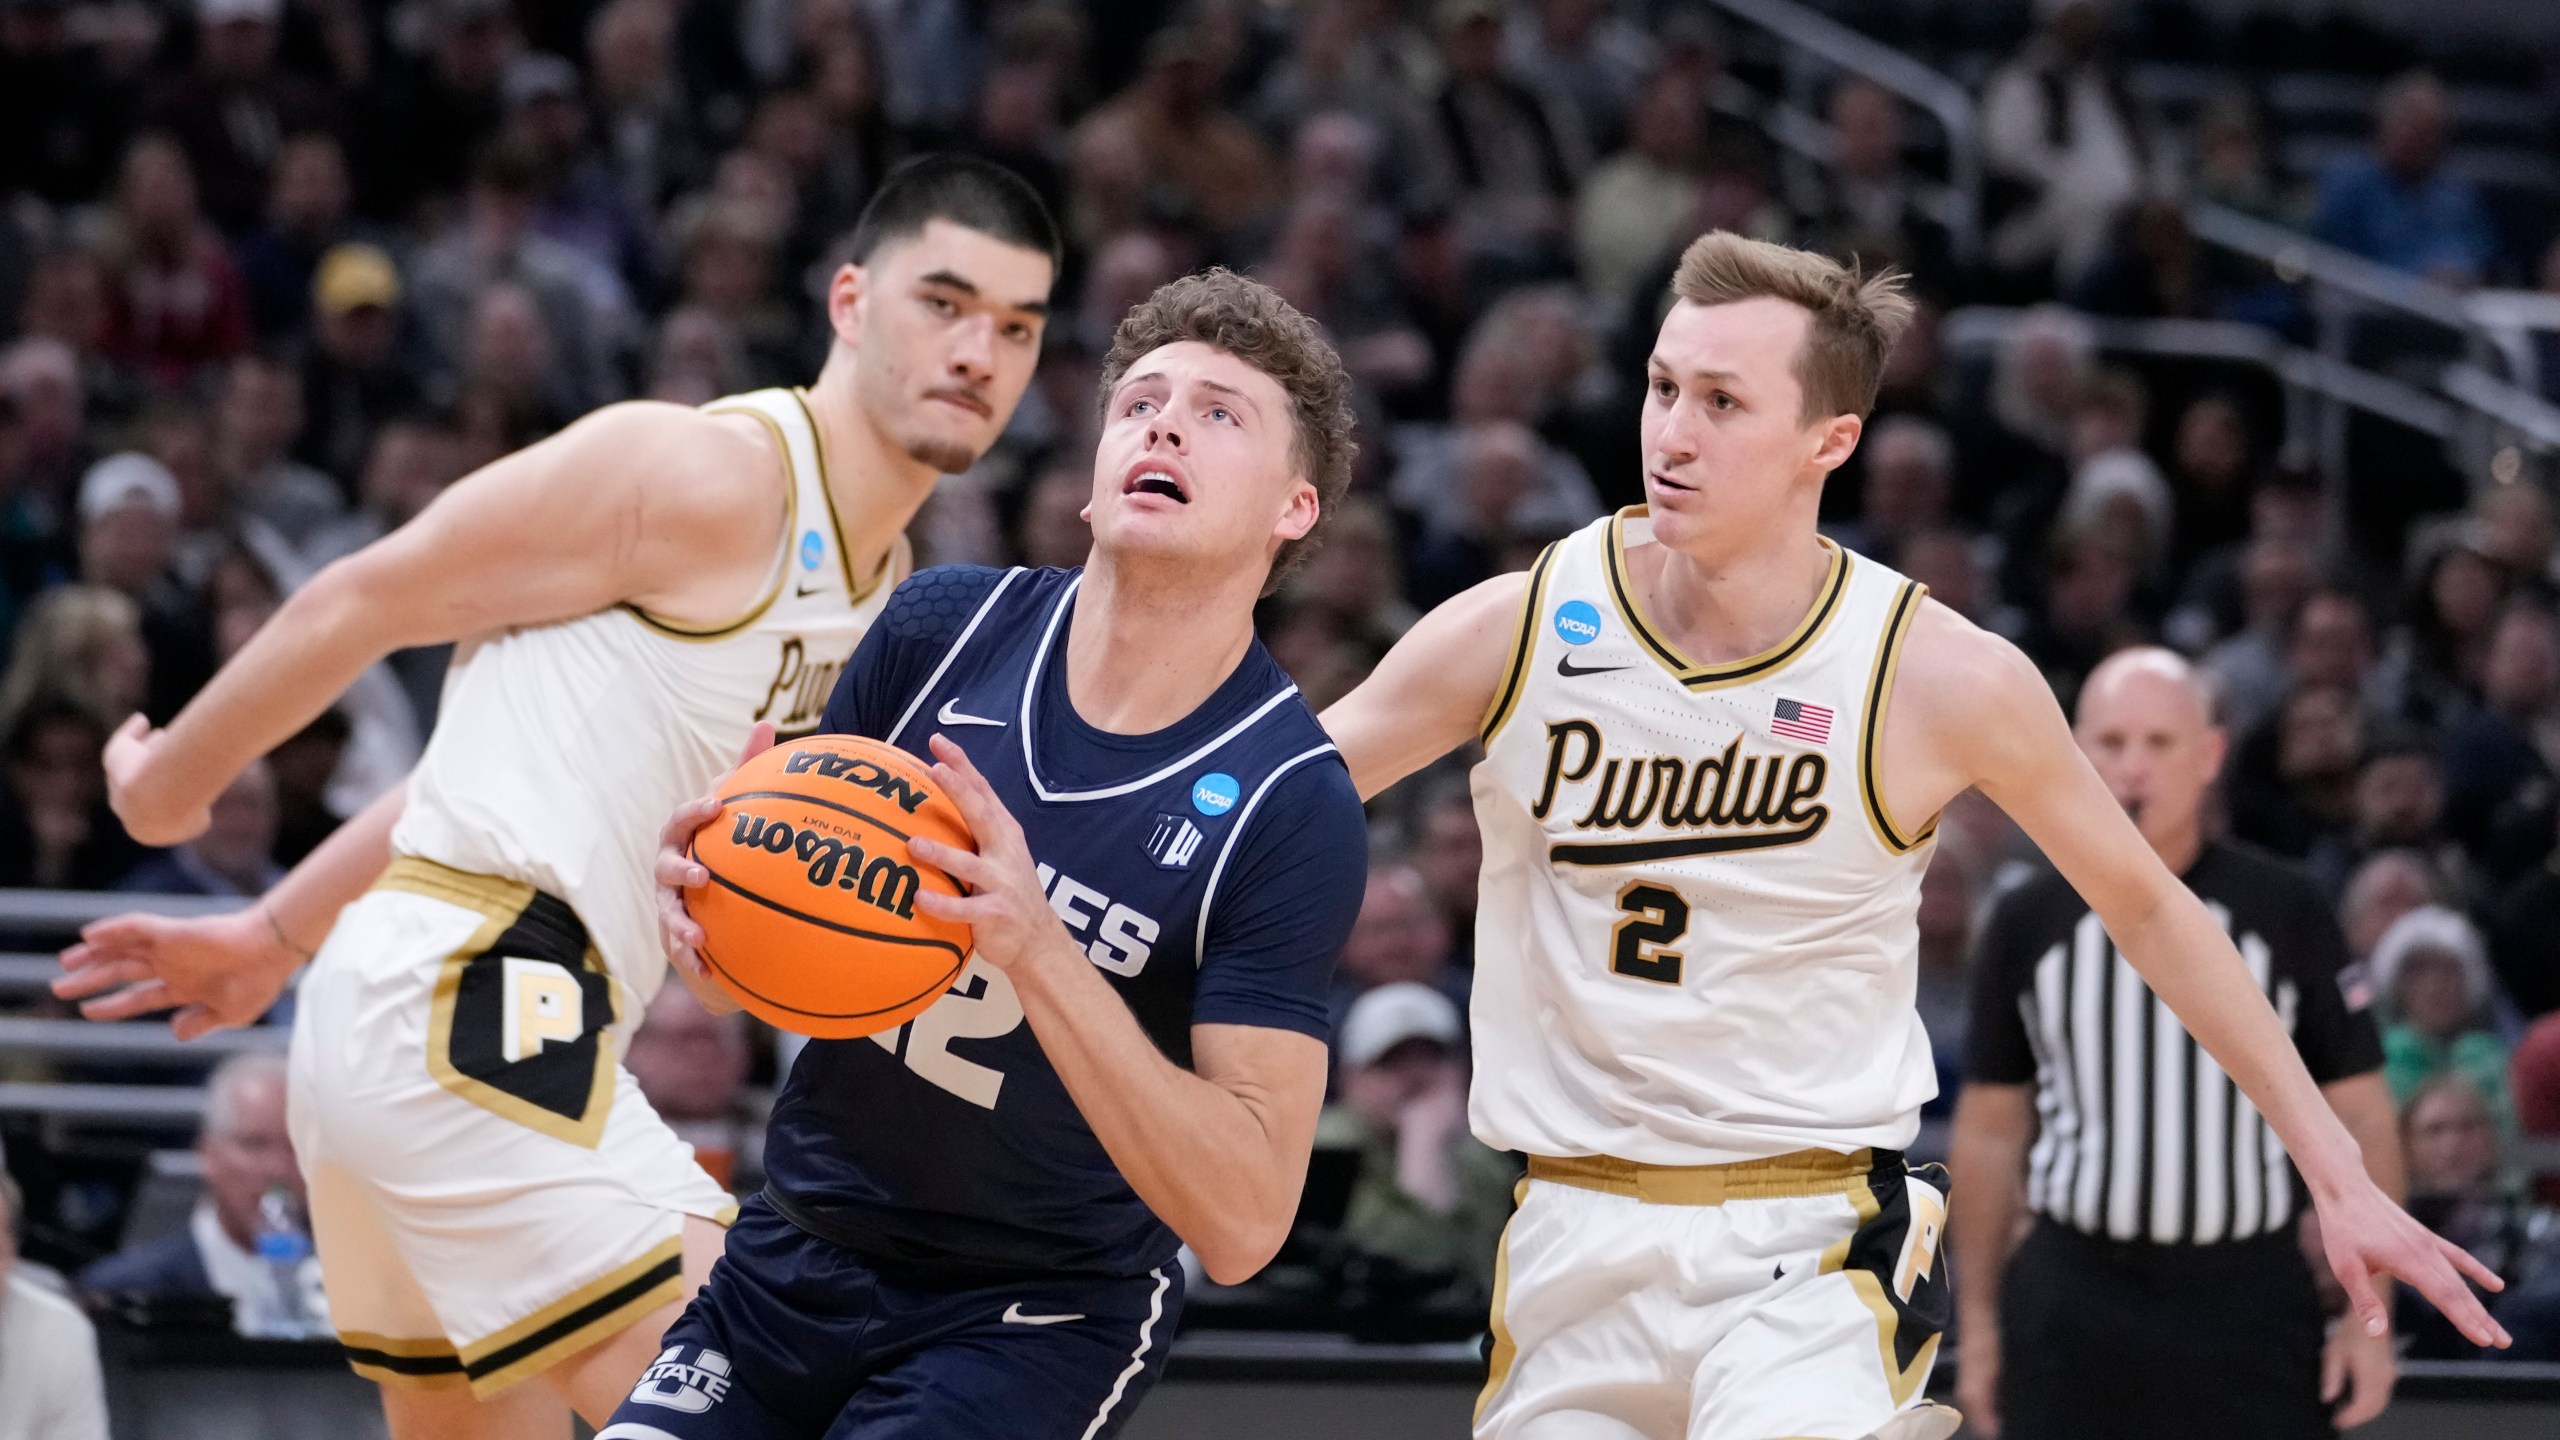 Utah State's Mason Falslev (12) heads to the basket past Purdue's Zach Edey and Fletcher Loyer (2) during the first half of a second-round college basketball game in the NCAA Tournament, Sunday, March 24, 2024 in Indianapolis. (AP Photo/Michael Conroy)